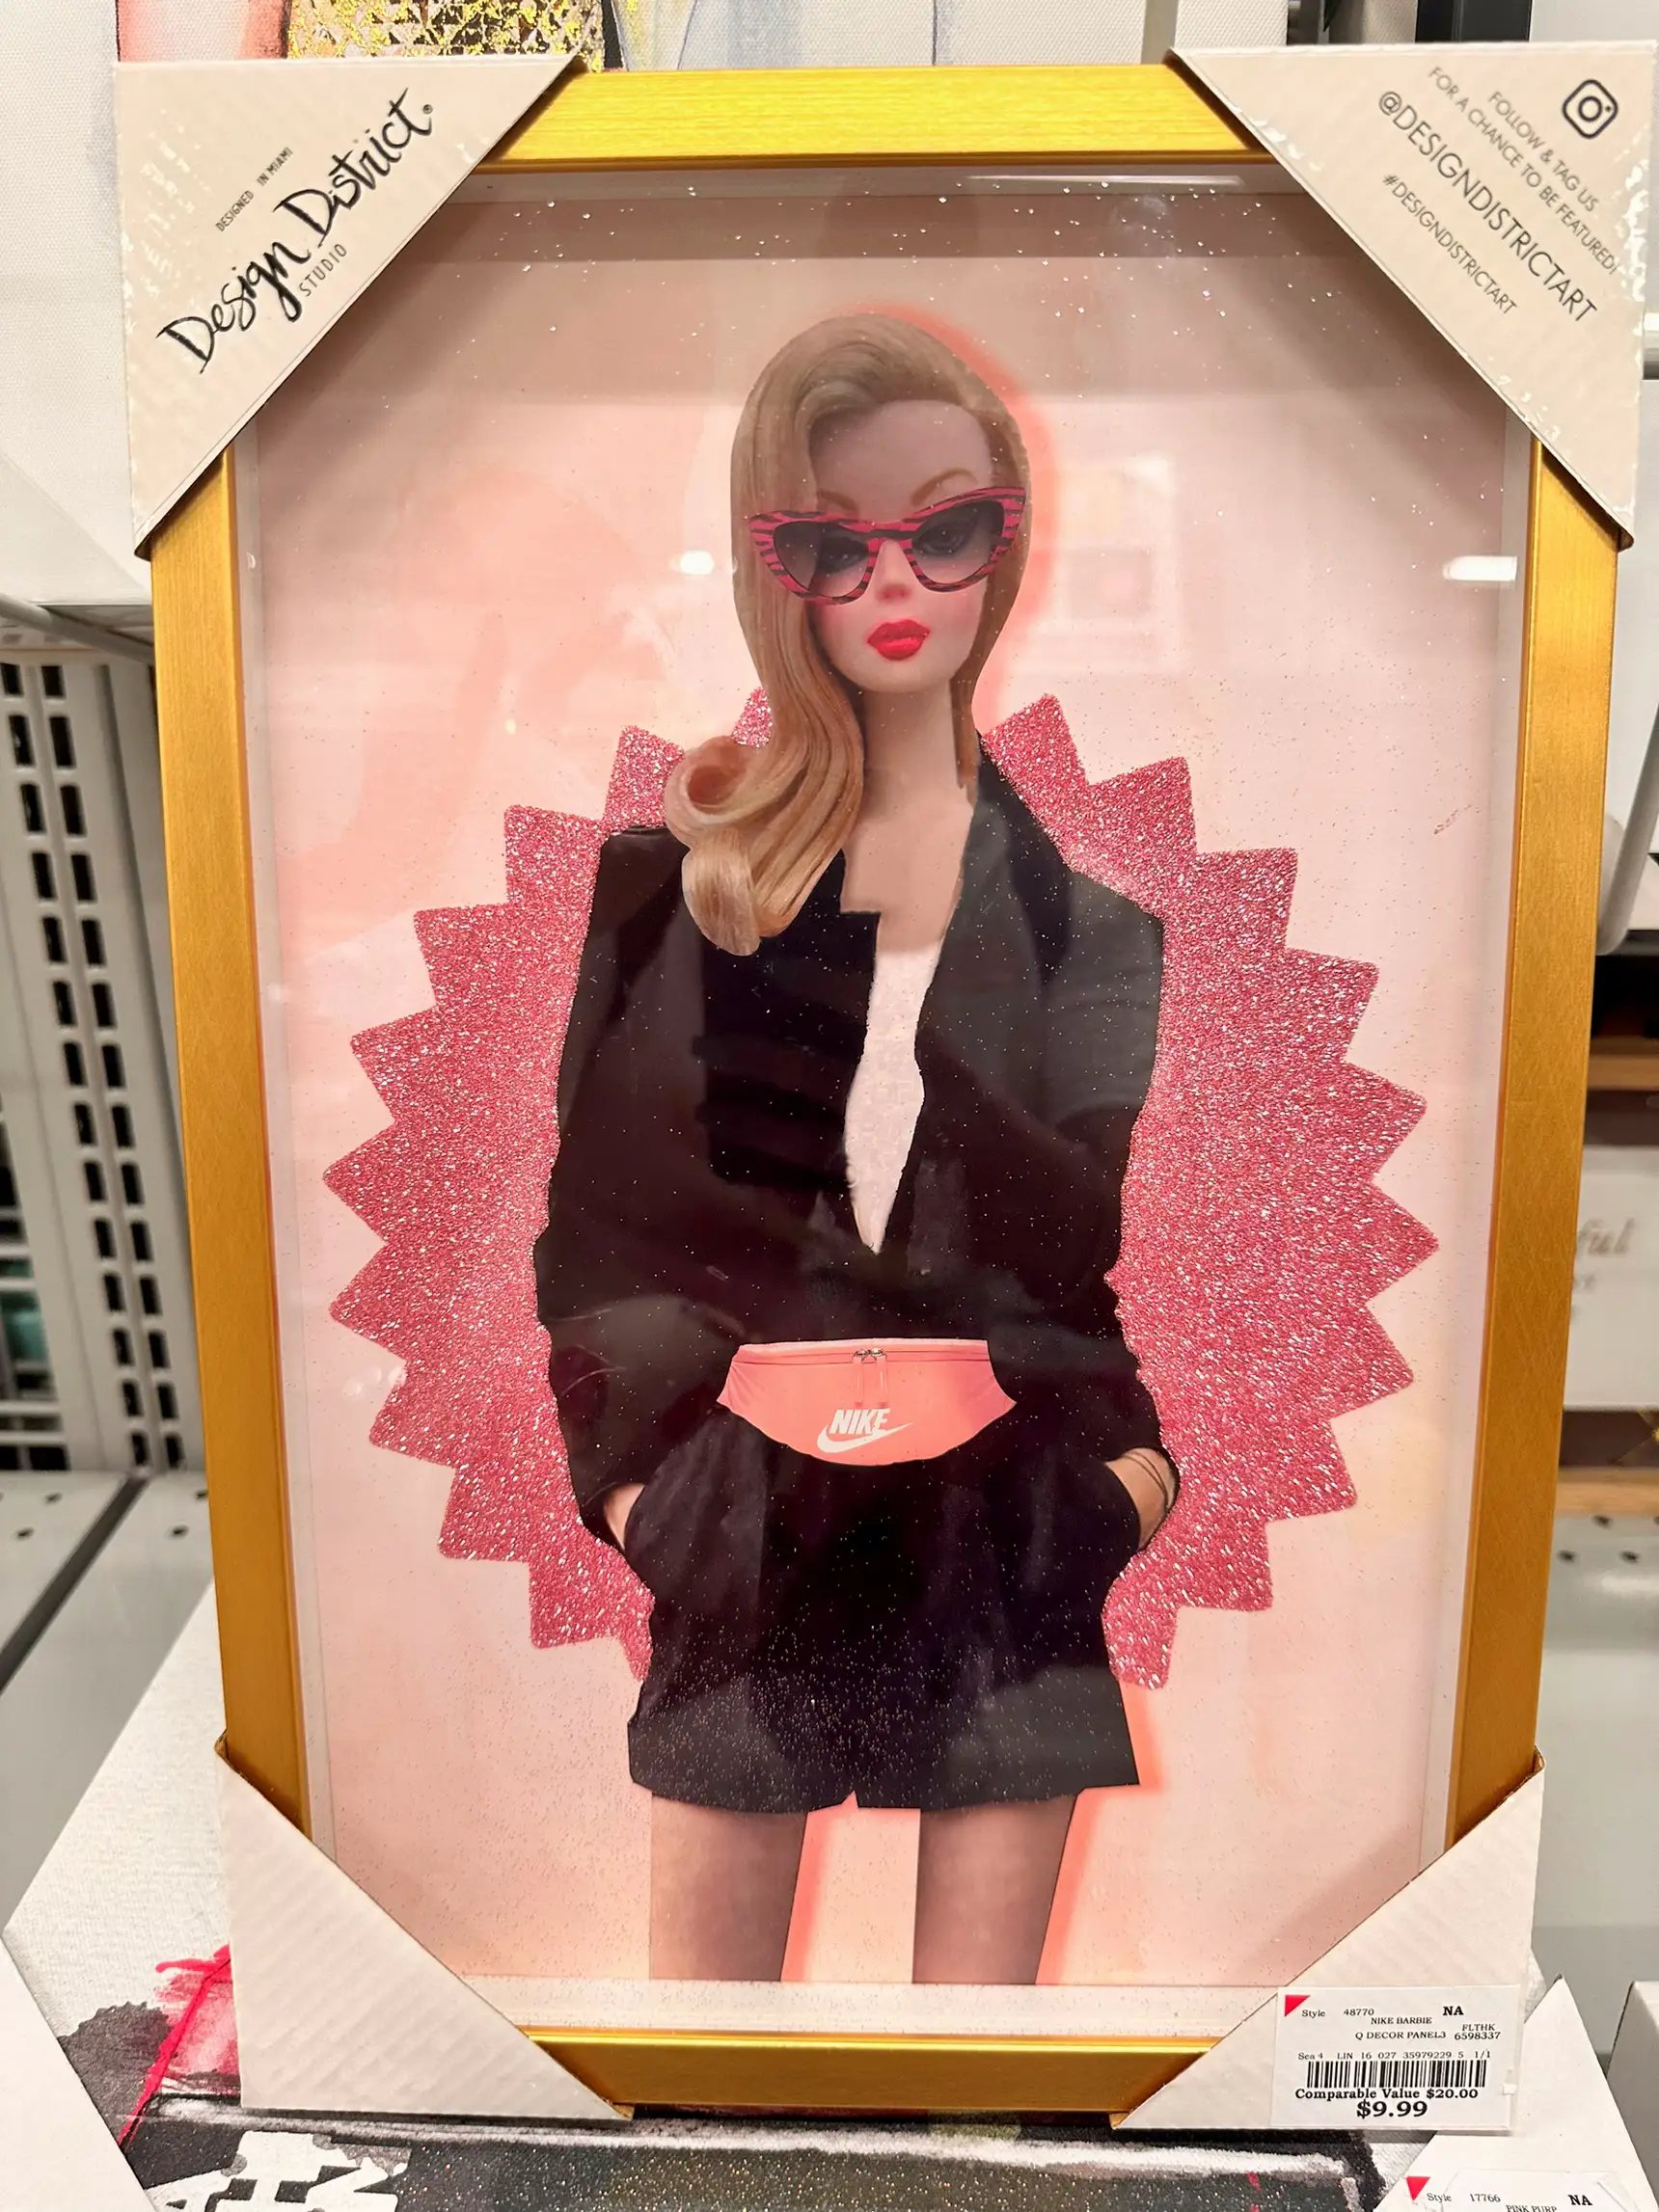 BARBIE FASHION FINDS AT BURLINGTON 🌸🥰✨🩷, Gallery posted by A.L.I.S  M.A.R